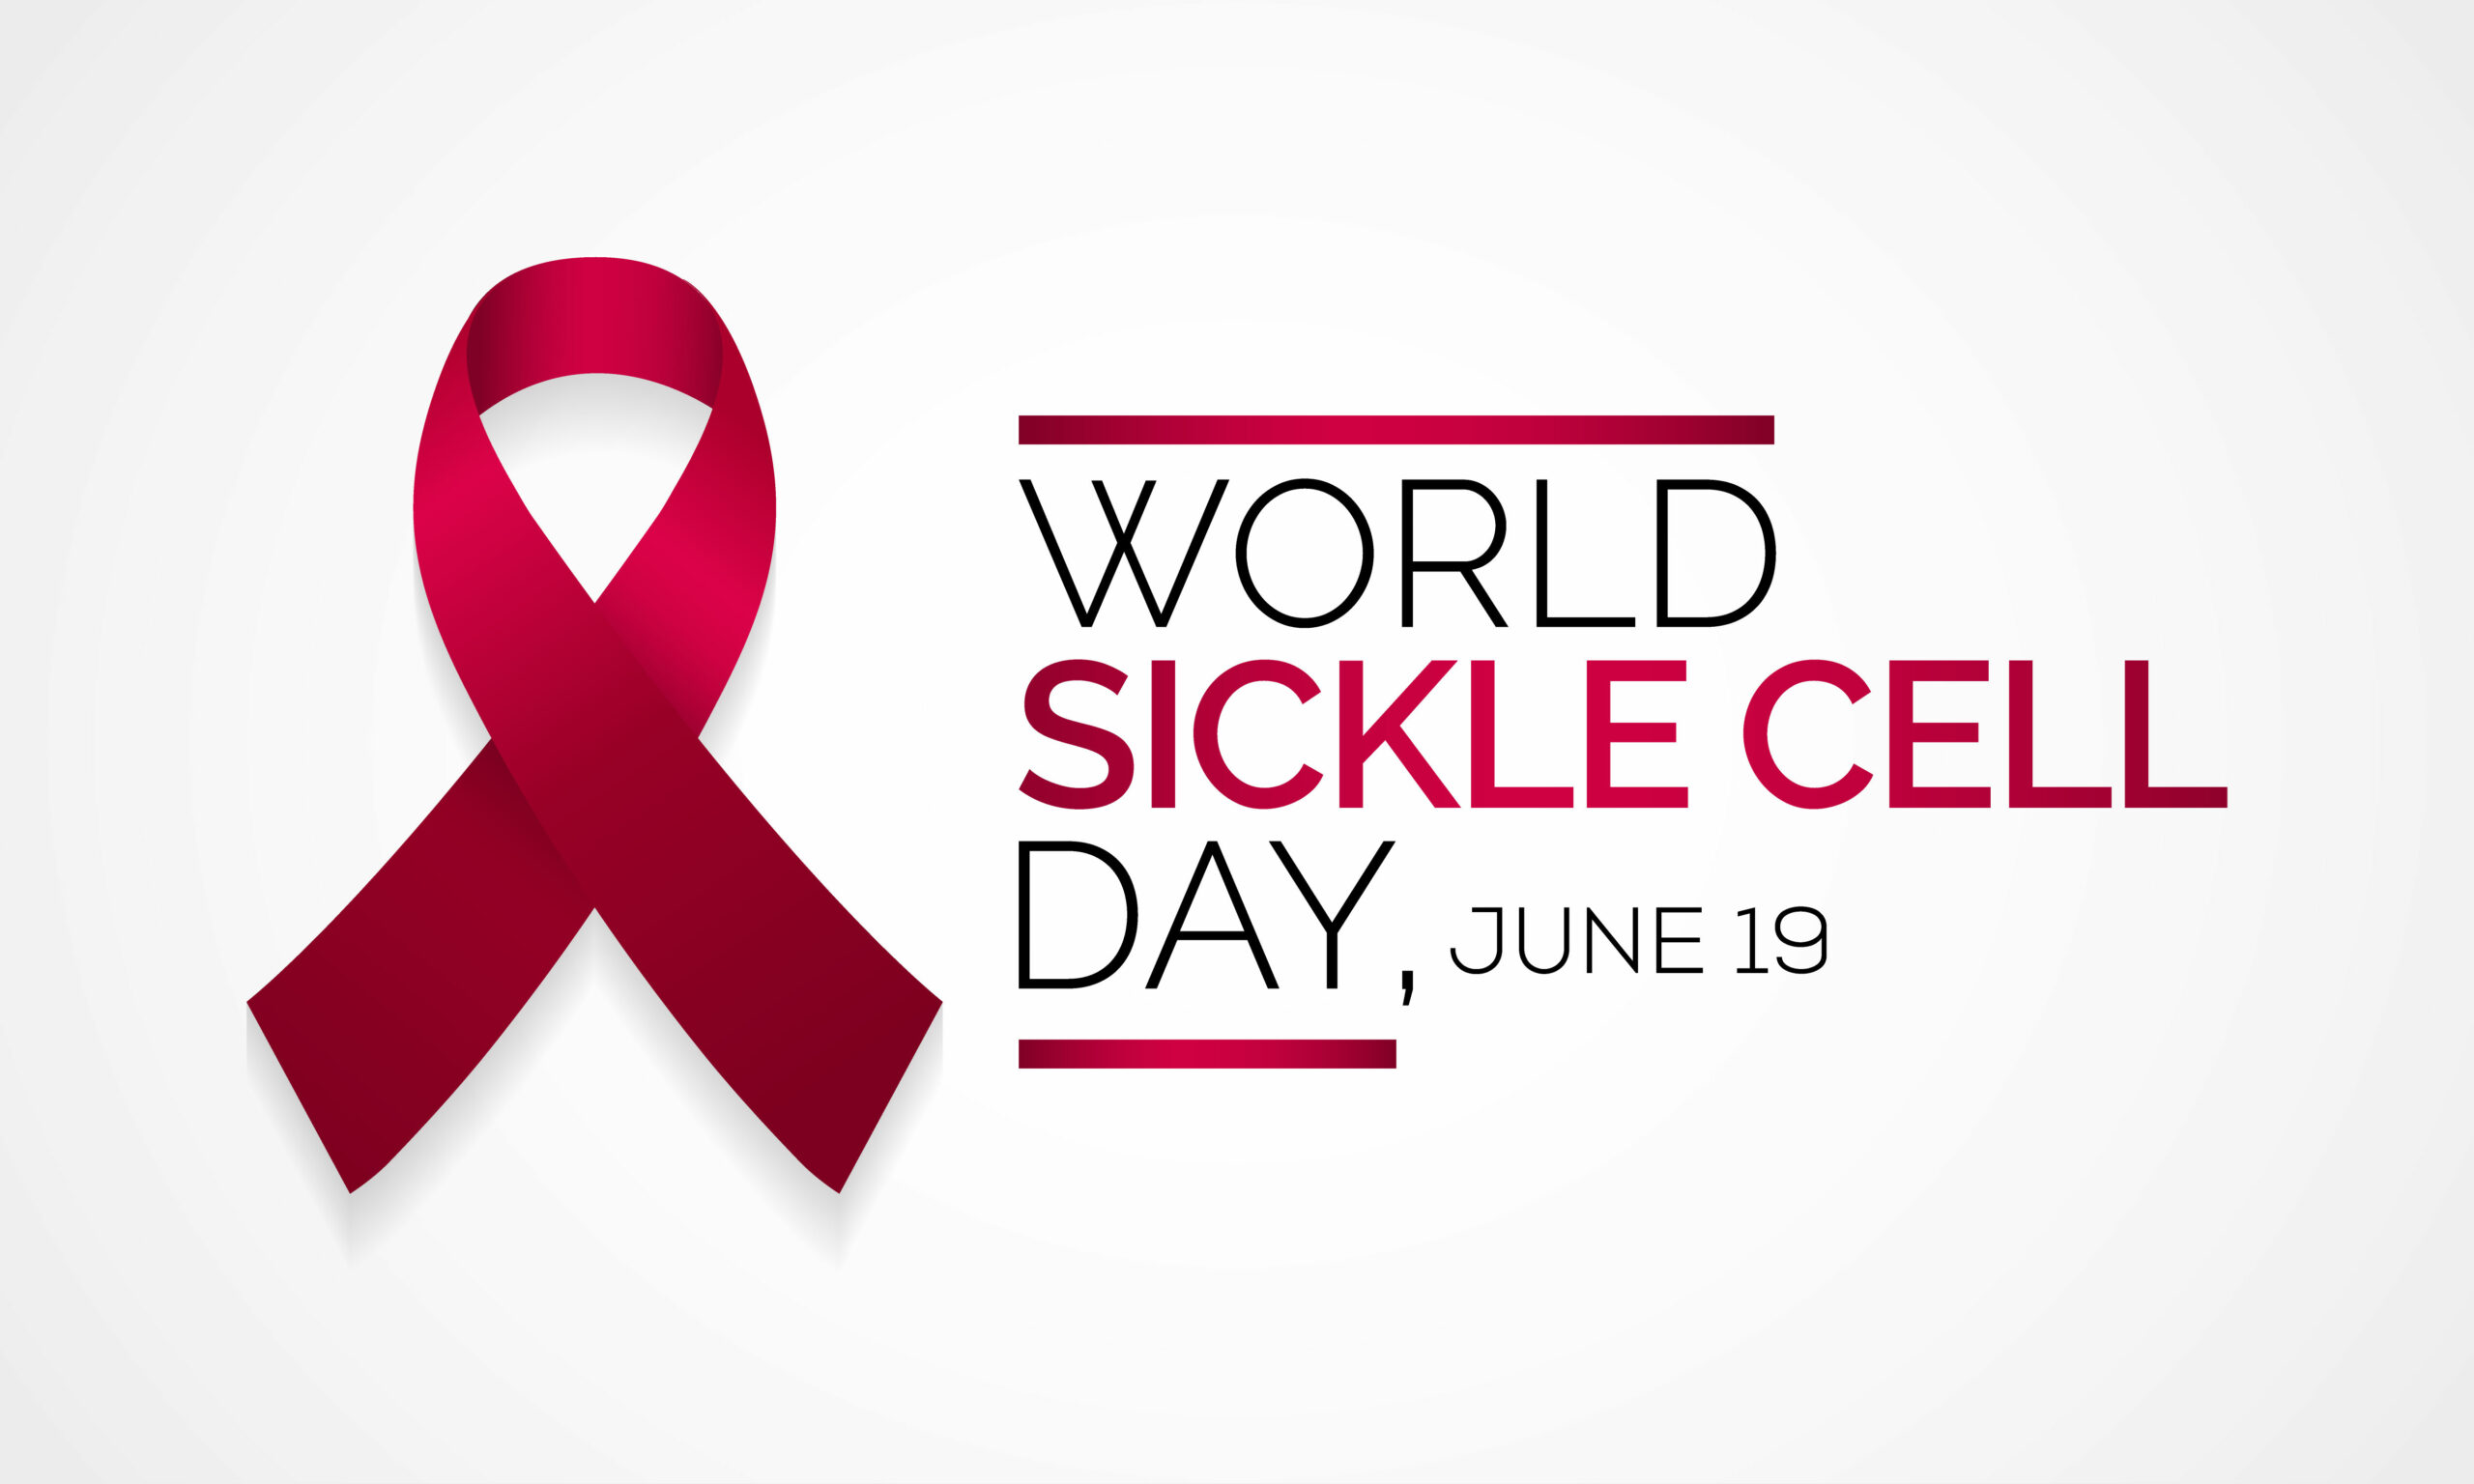 Blood donors make a world of difference on World Sickle Cell Day 